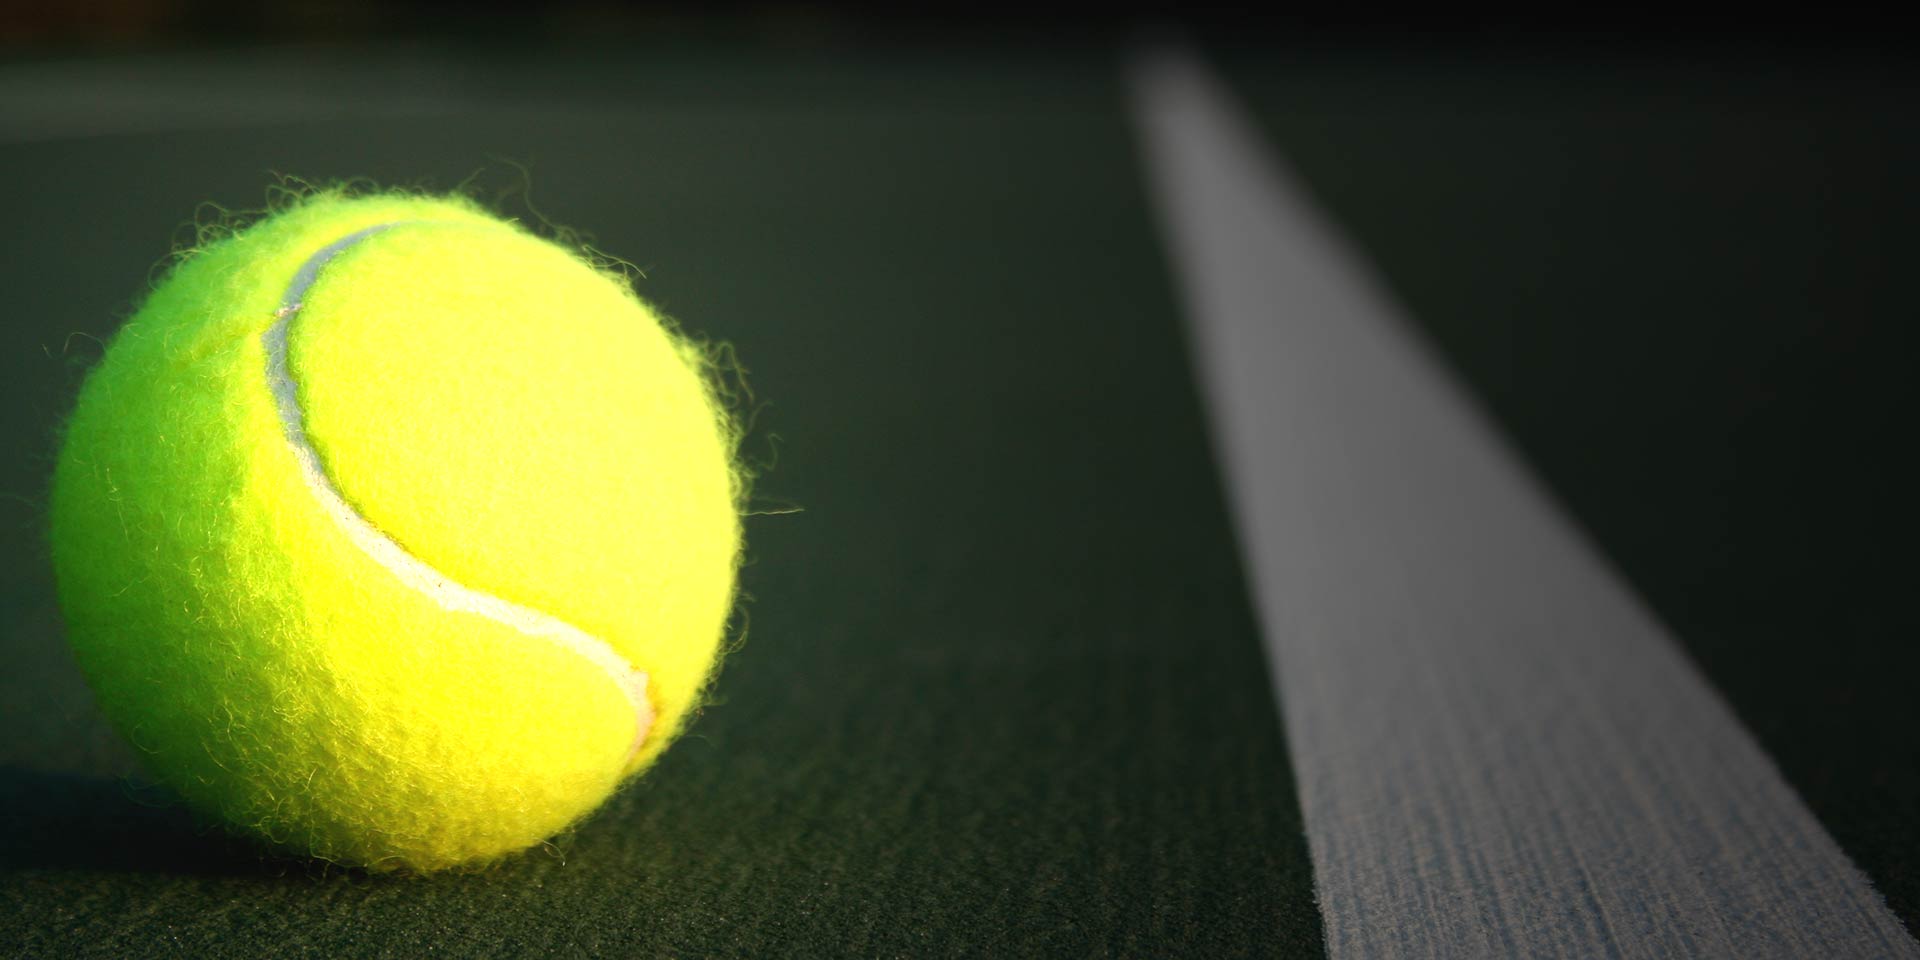 how to make a tennis ball glow in the dark